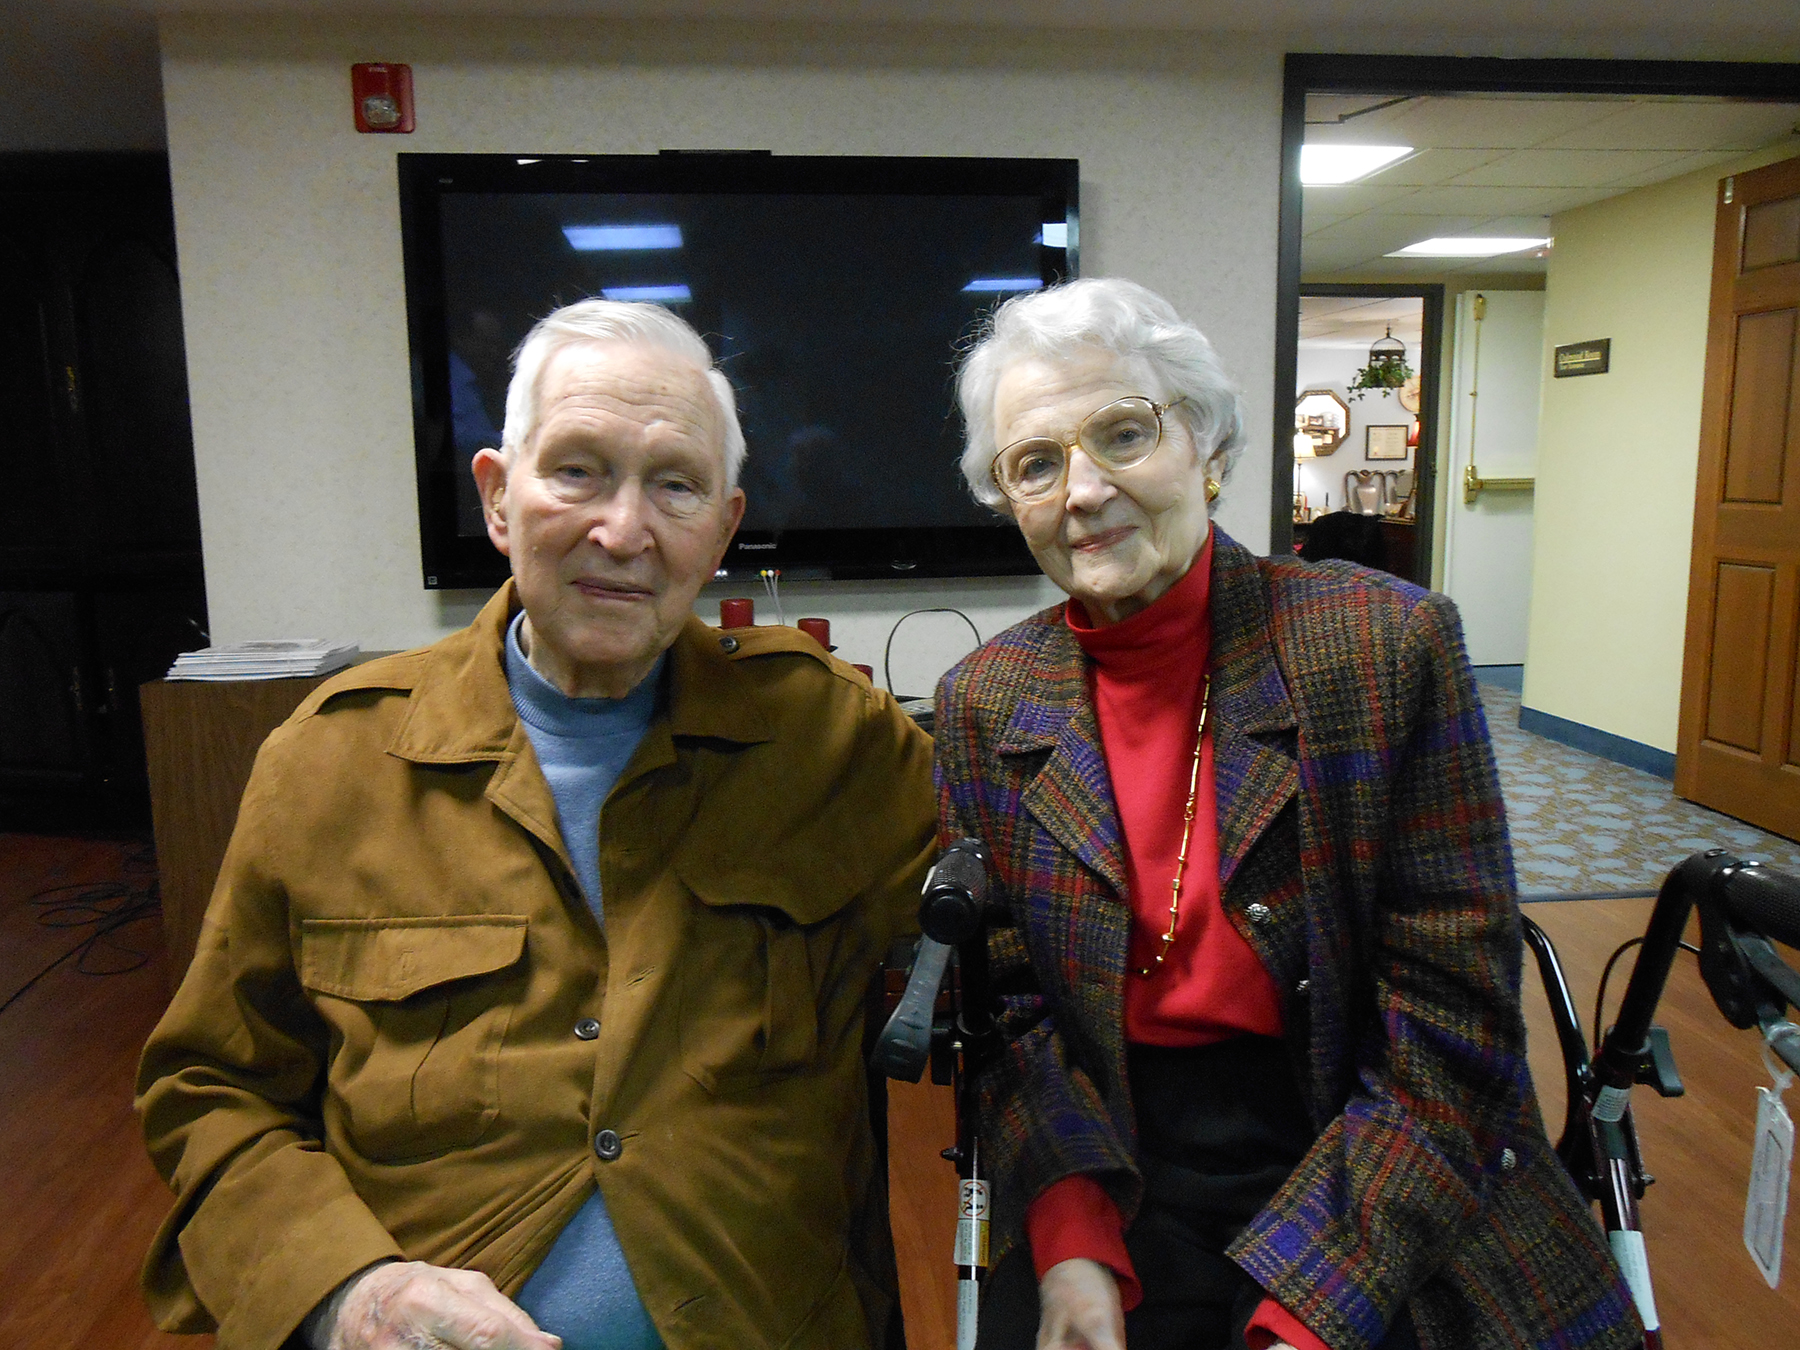 Dr. Malcolm Ritchie and his wife, 16 Jan. 2014